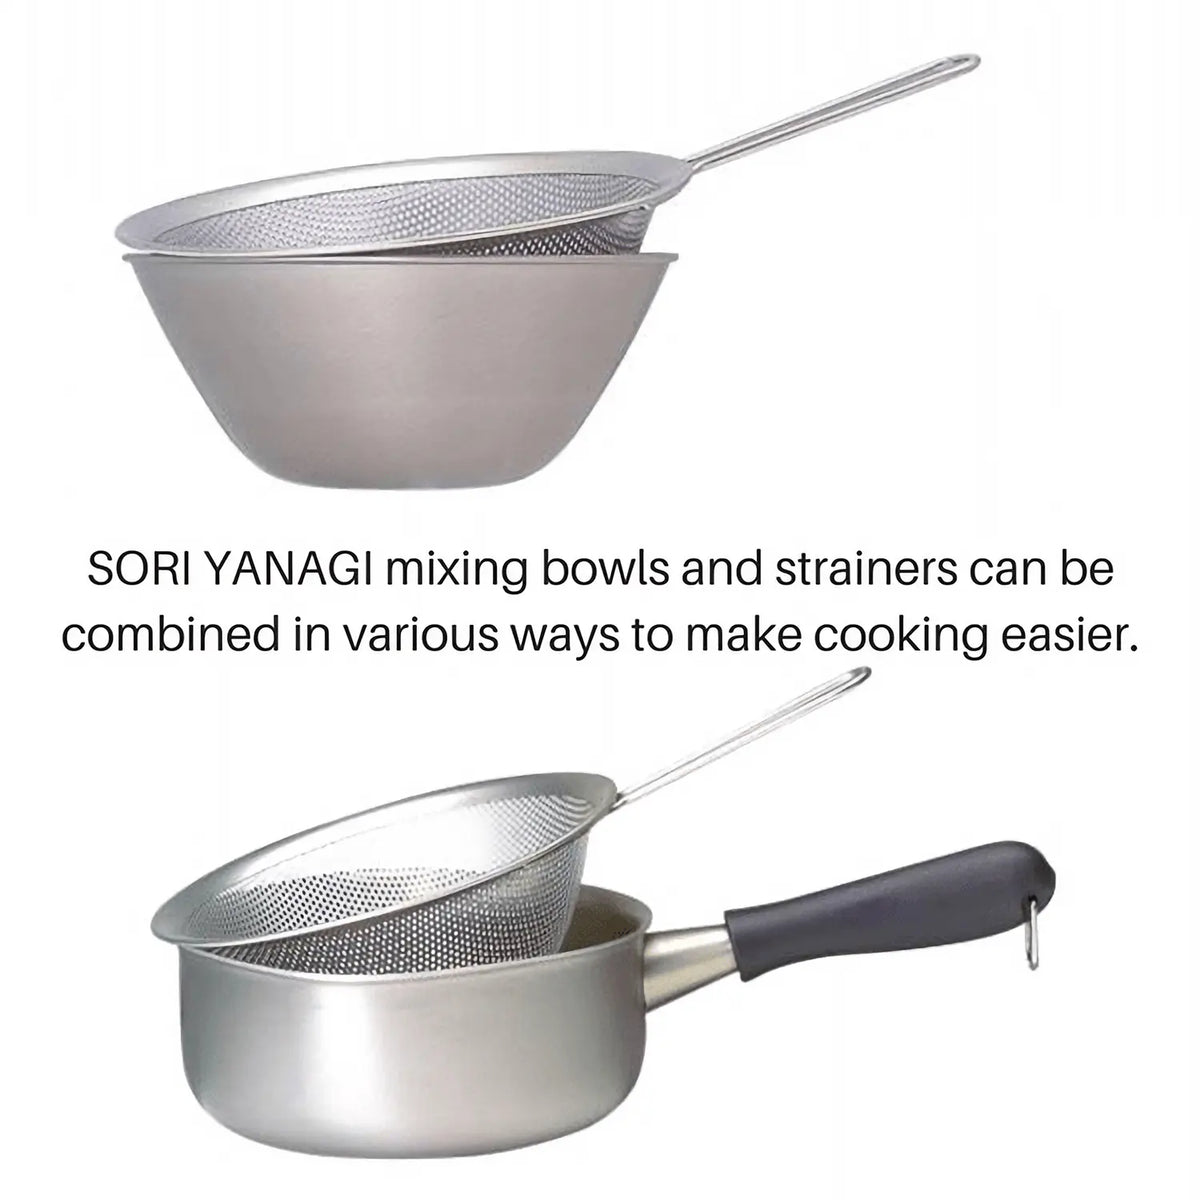 Sori Yanagi Stainless Steel Perforated Strainer with Handle